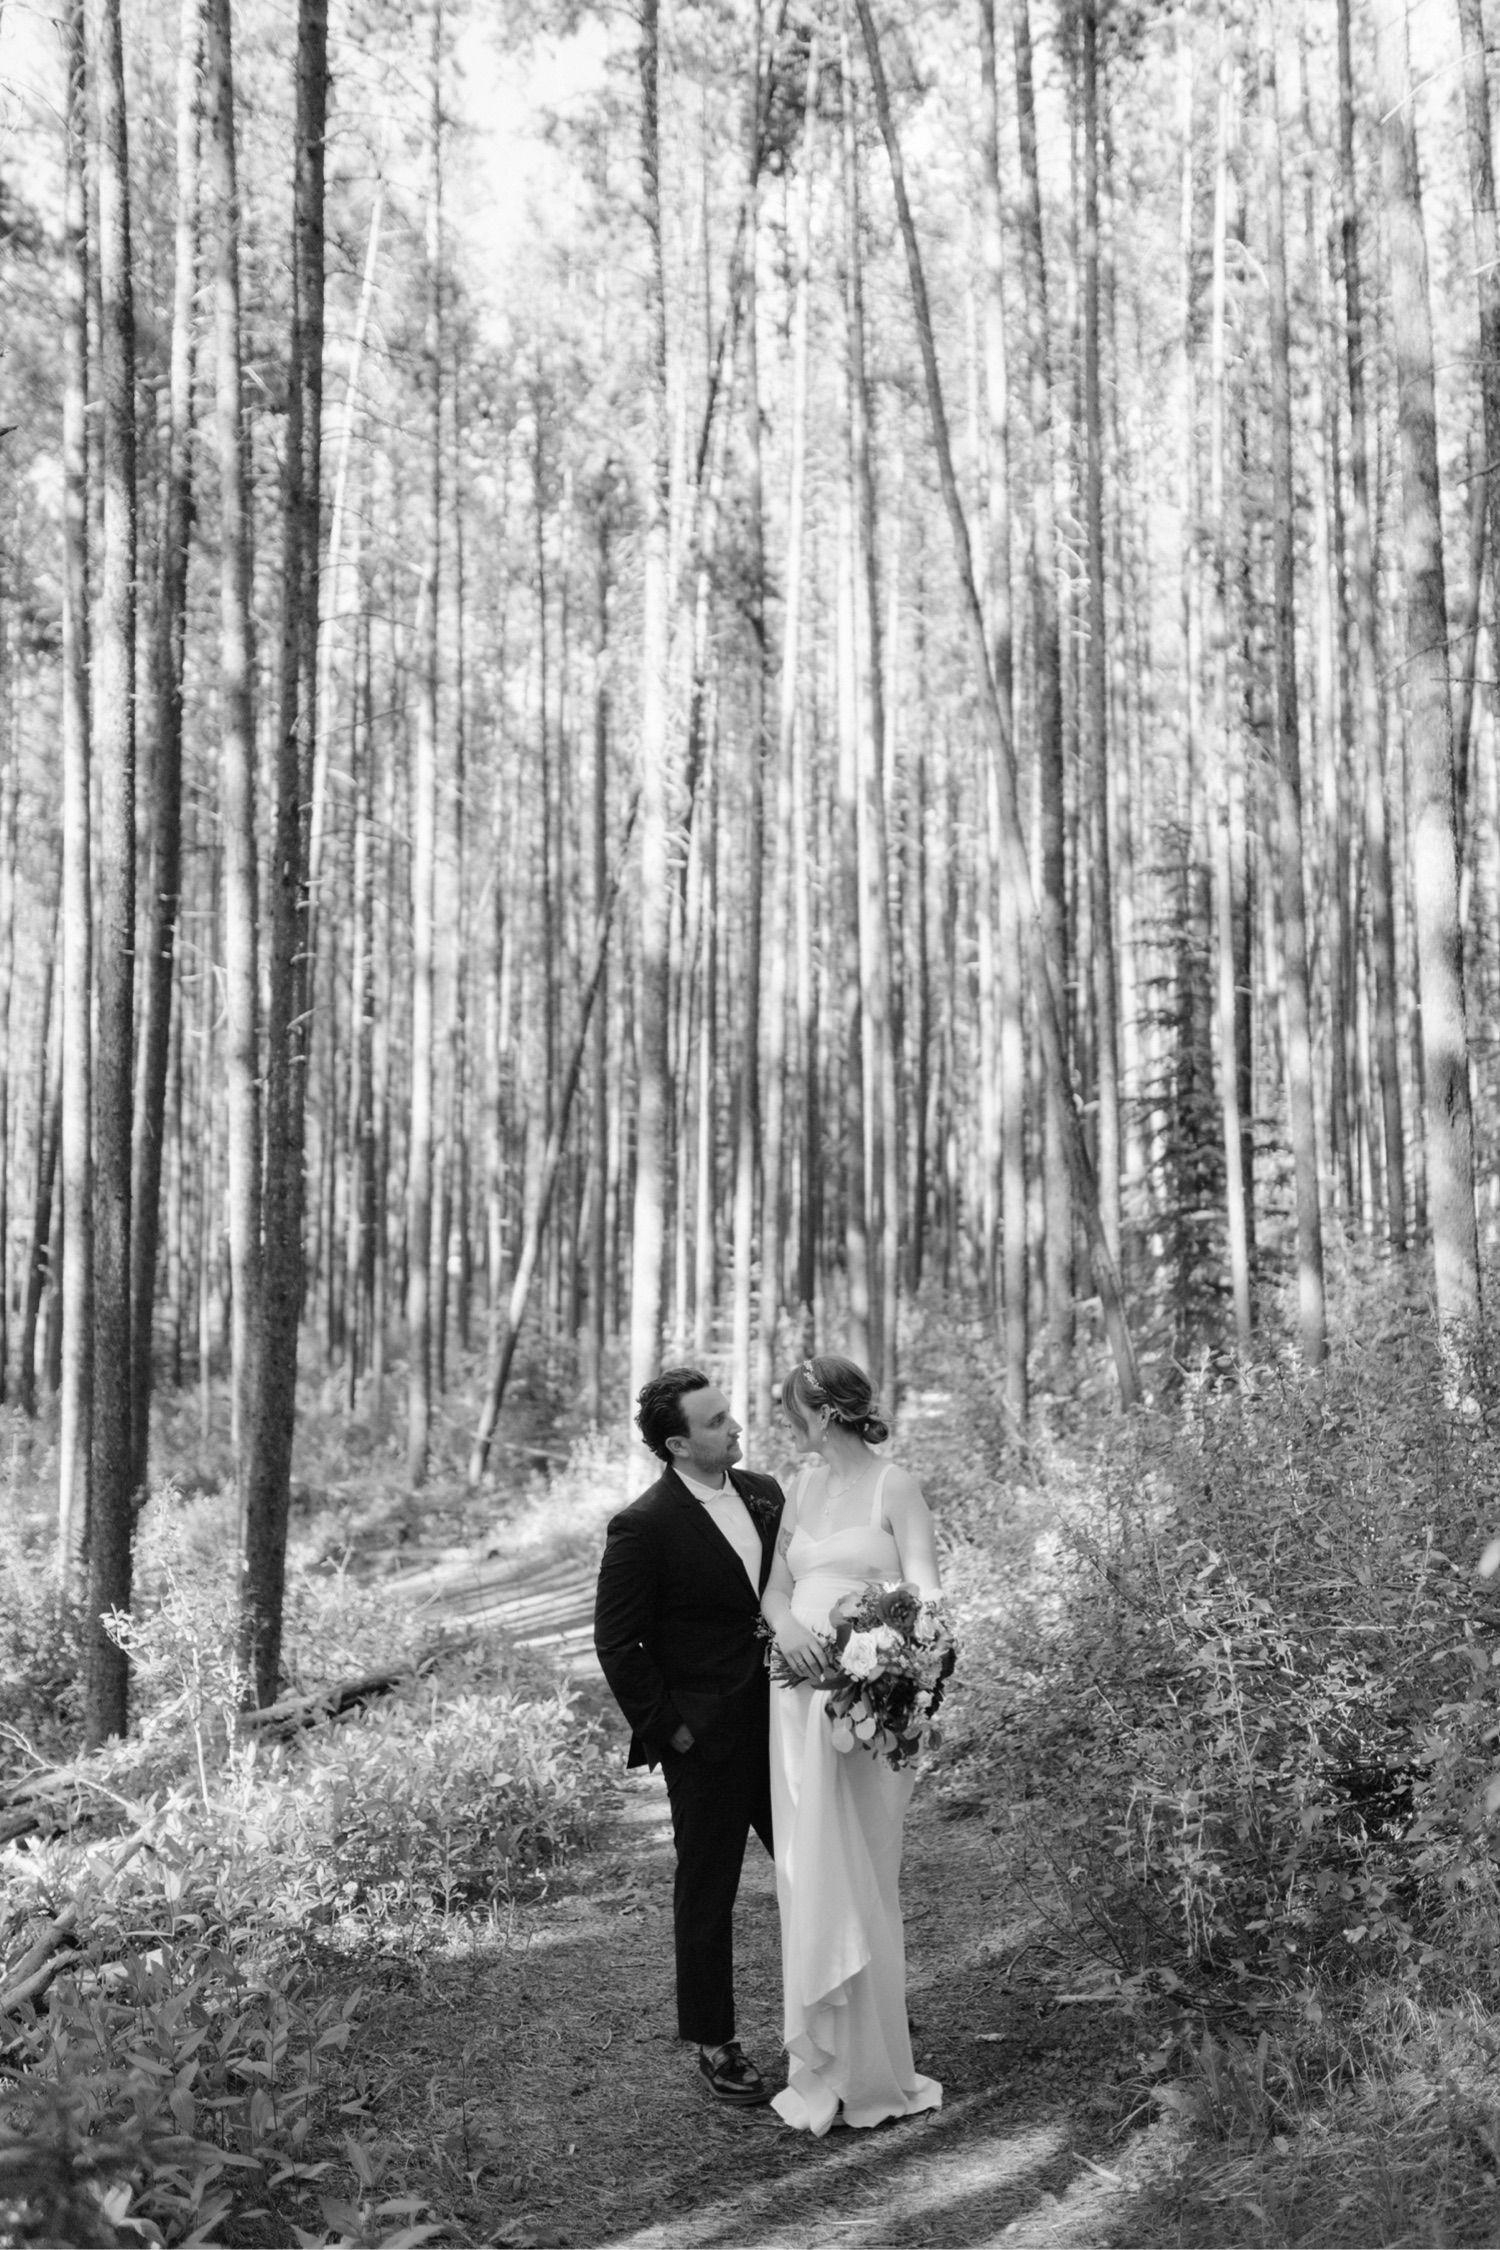 Lodgepole pine walkway with a stylish timeless bridal couple